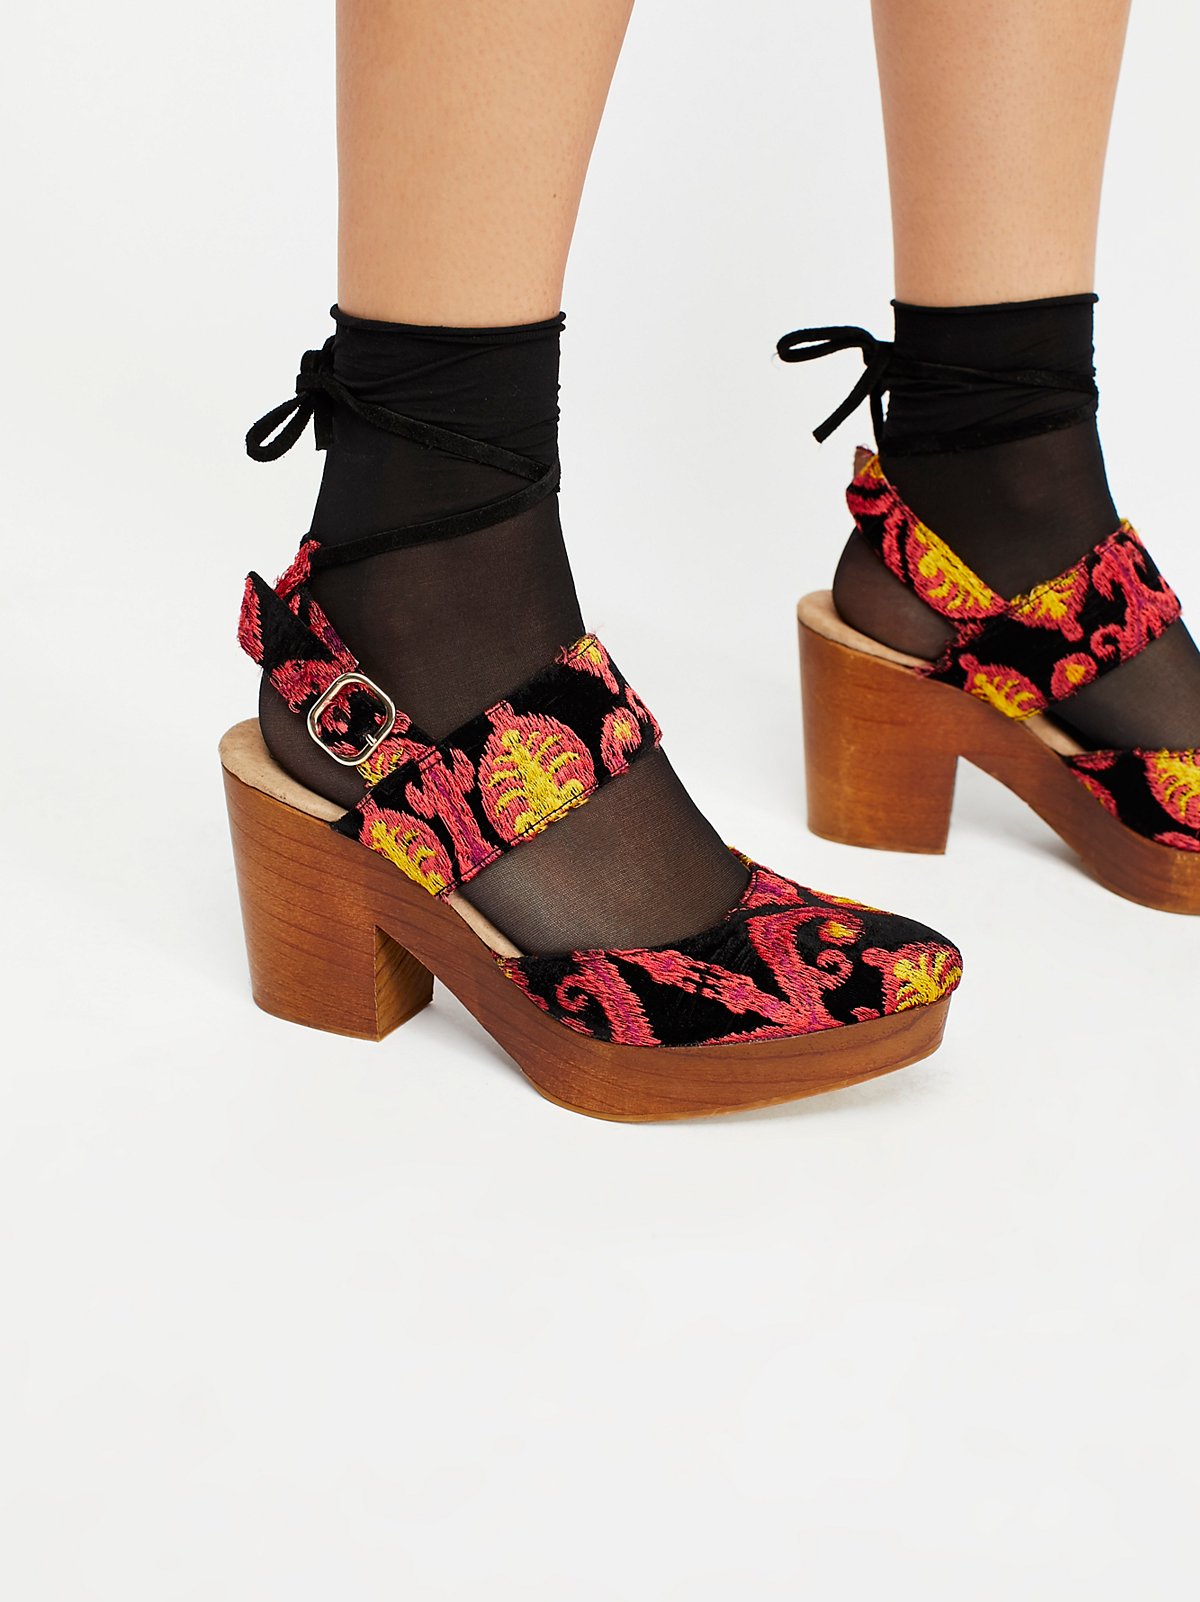 Cute Fashion Clogs & Mules for Women | Free People